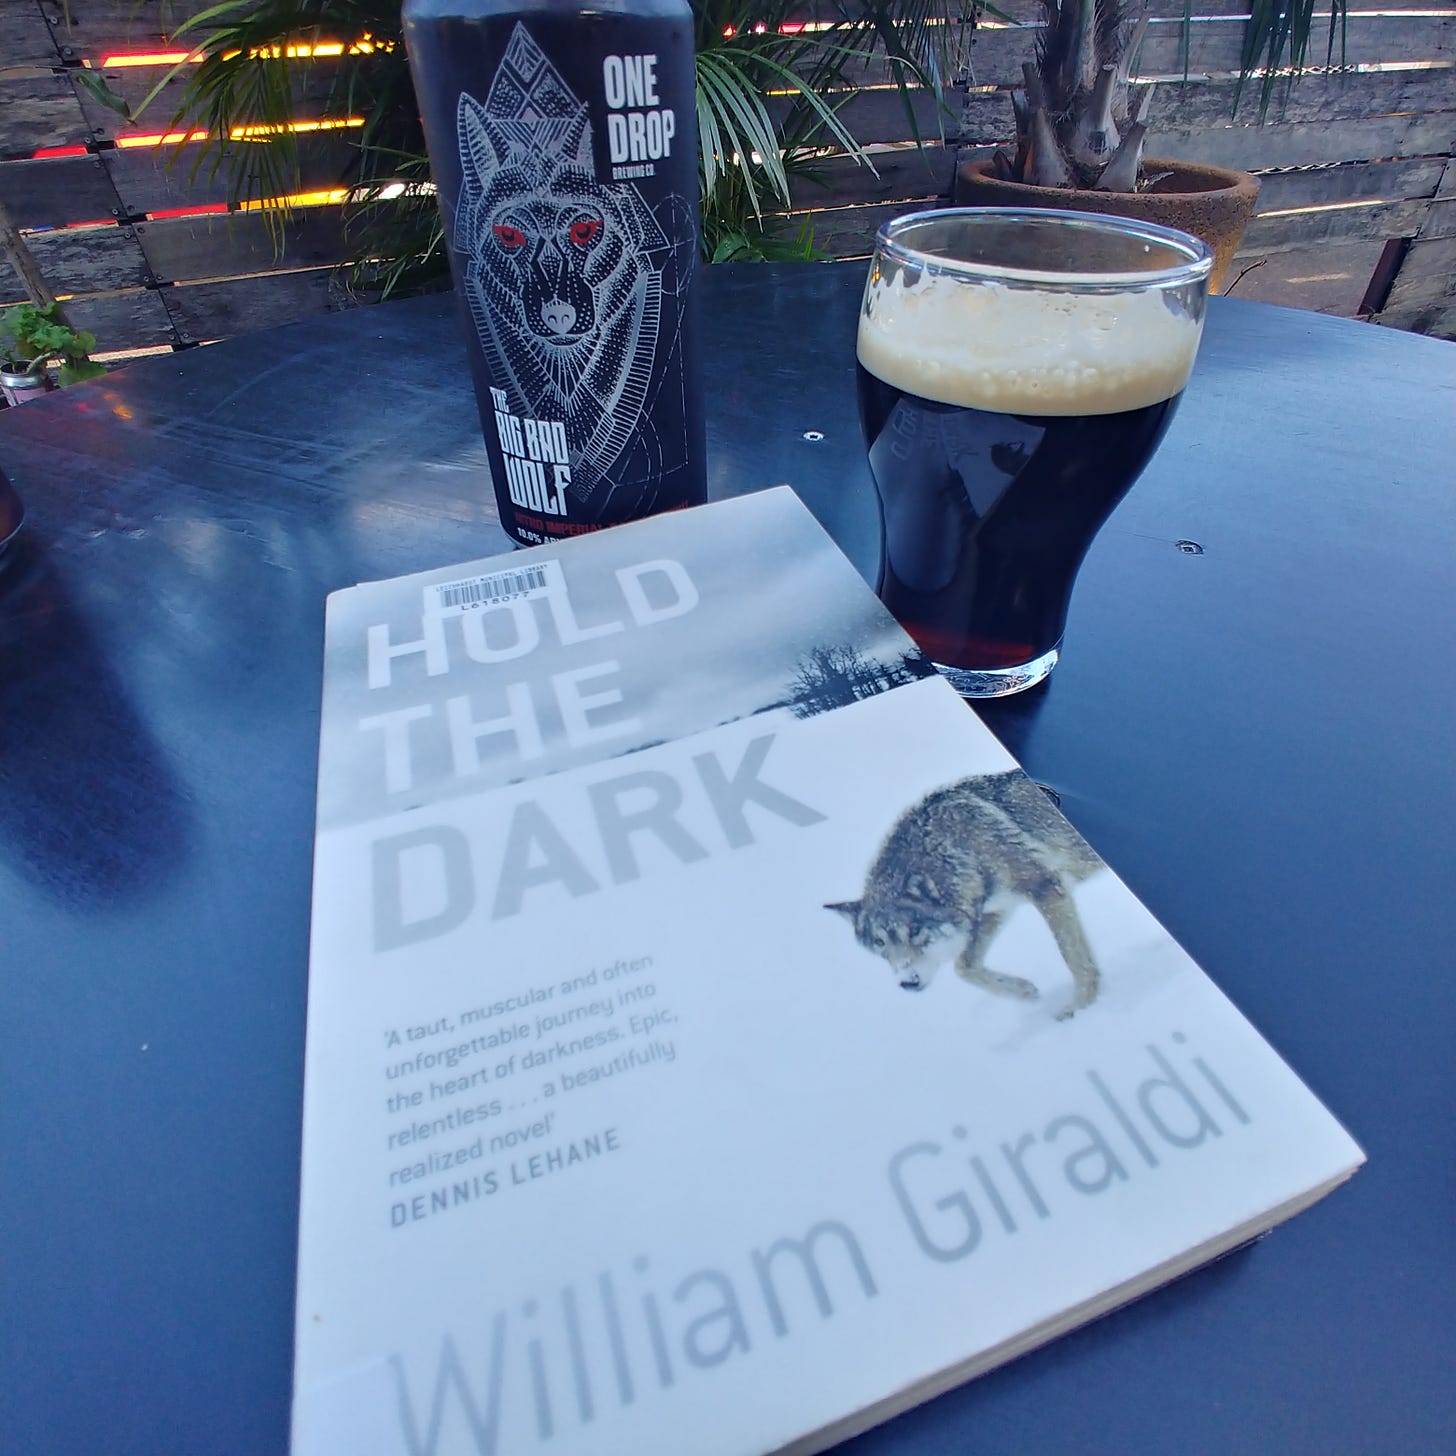 Hold the Dark by William Giraldi, and One Drop Brewing Co's The Big Bad Wolf